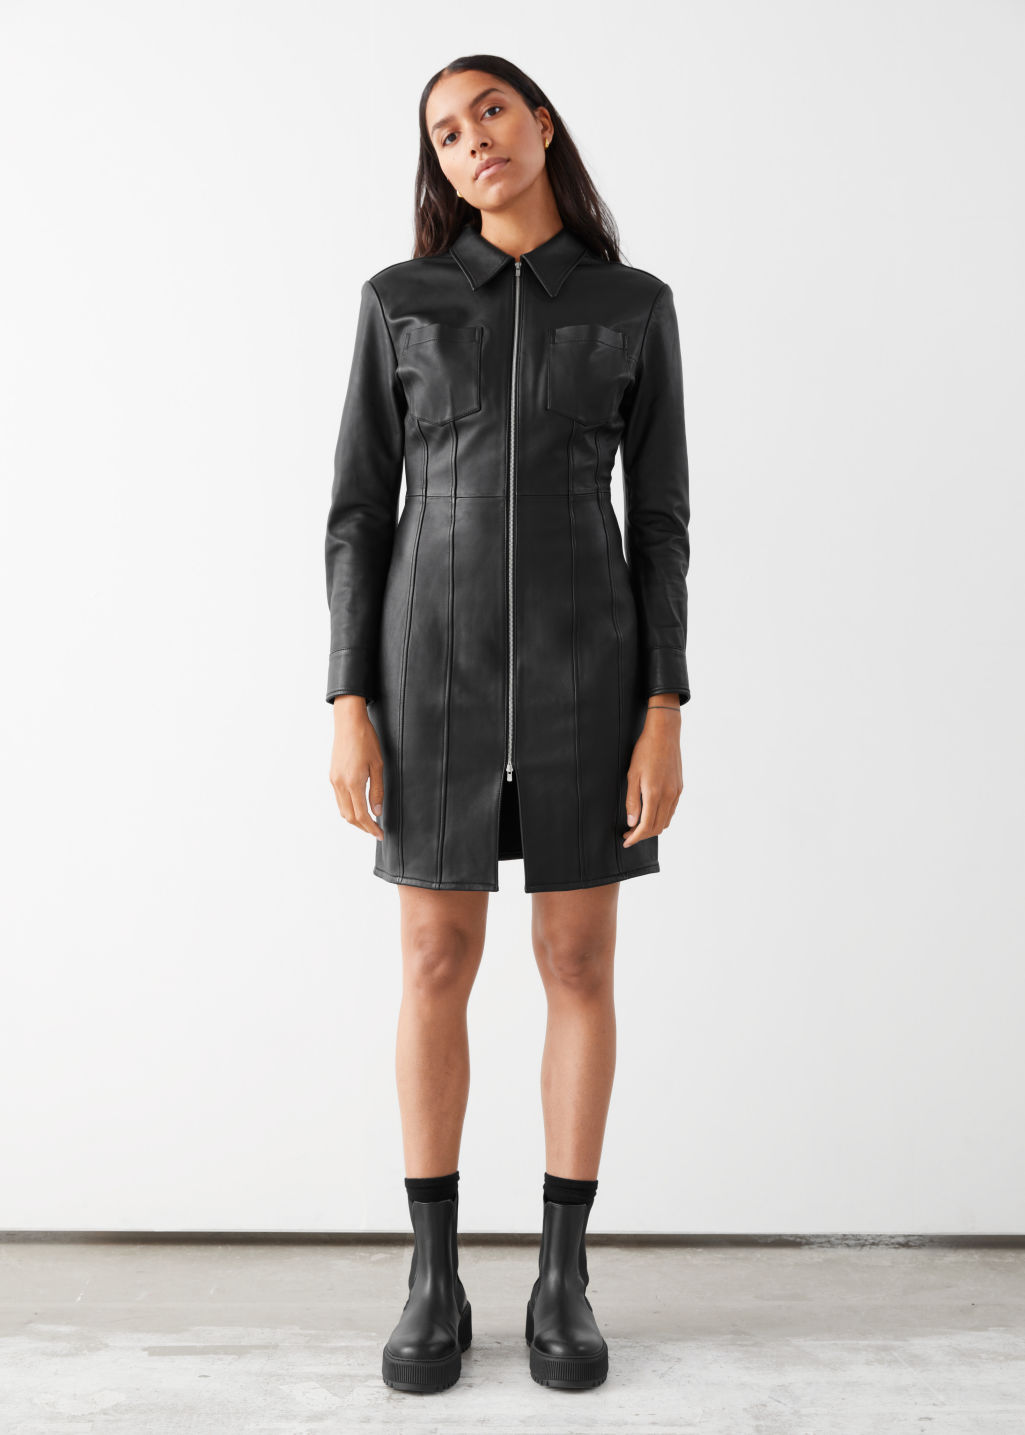 Leather Zip Front Dress - Black - Mini dresses - & Other Stories